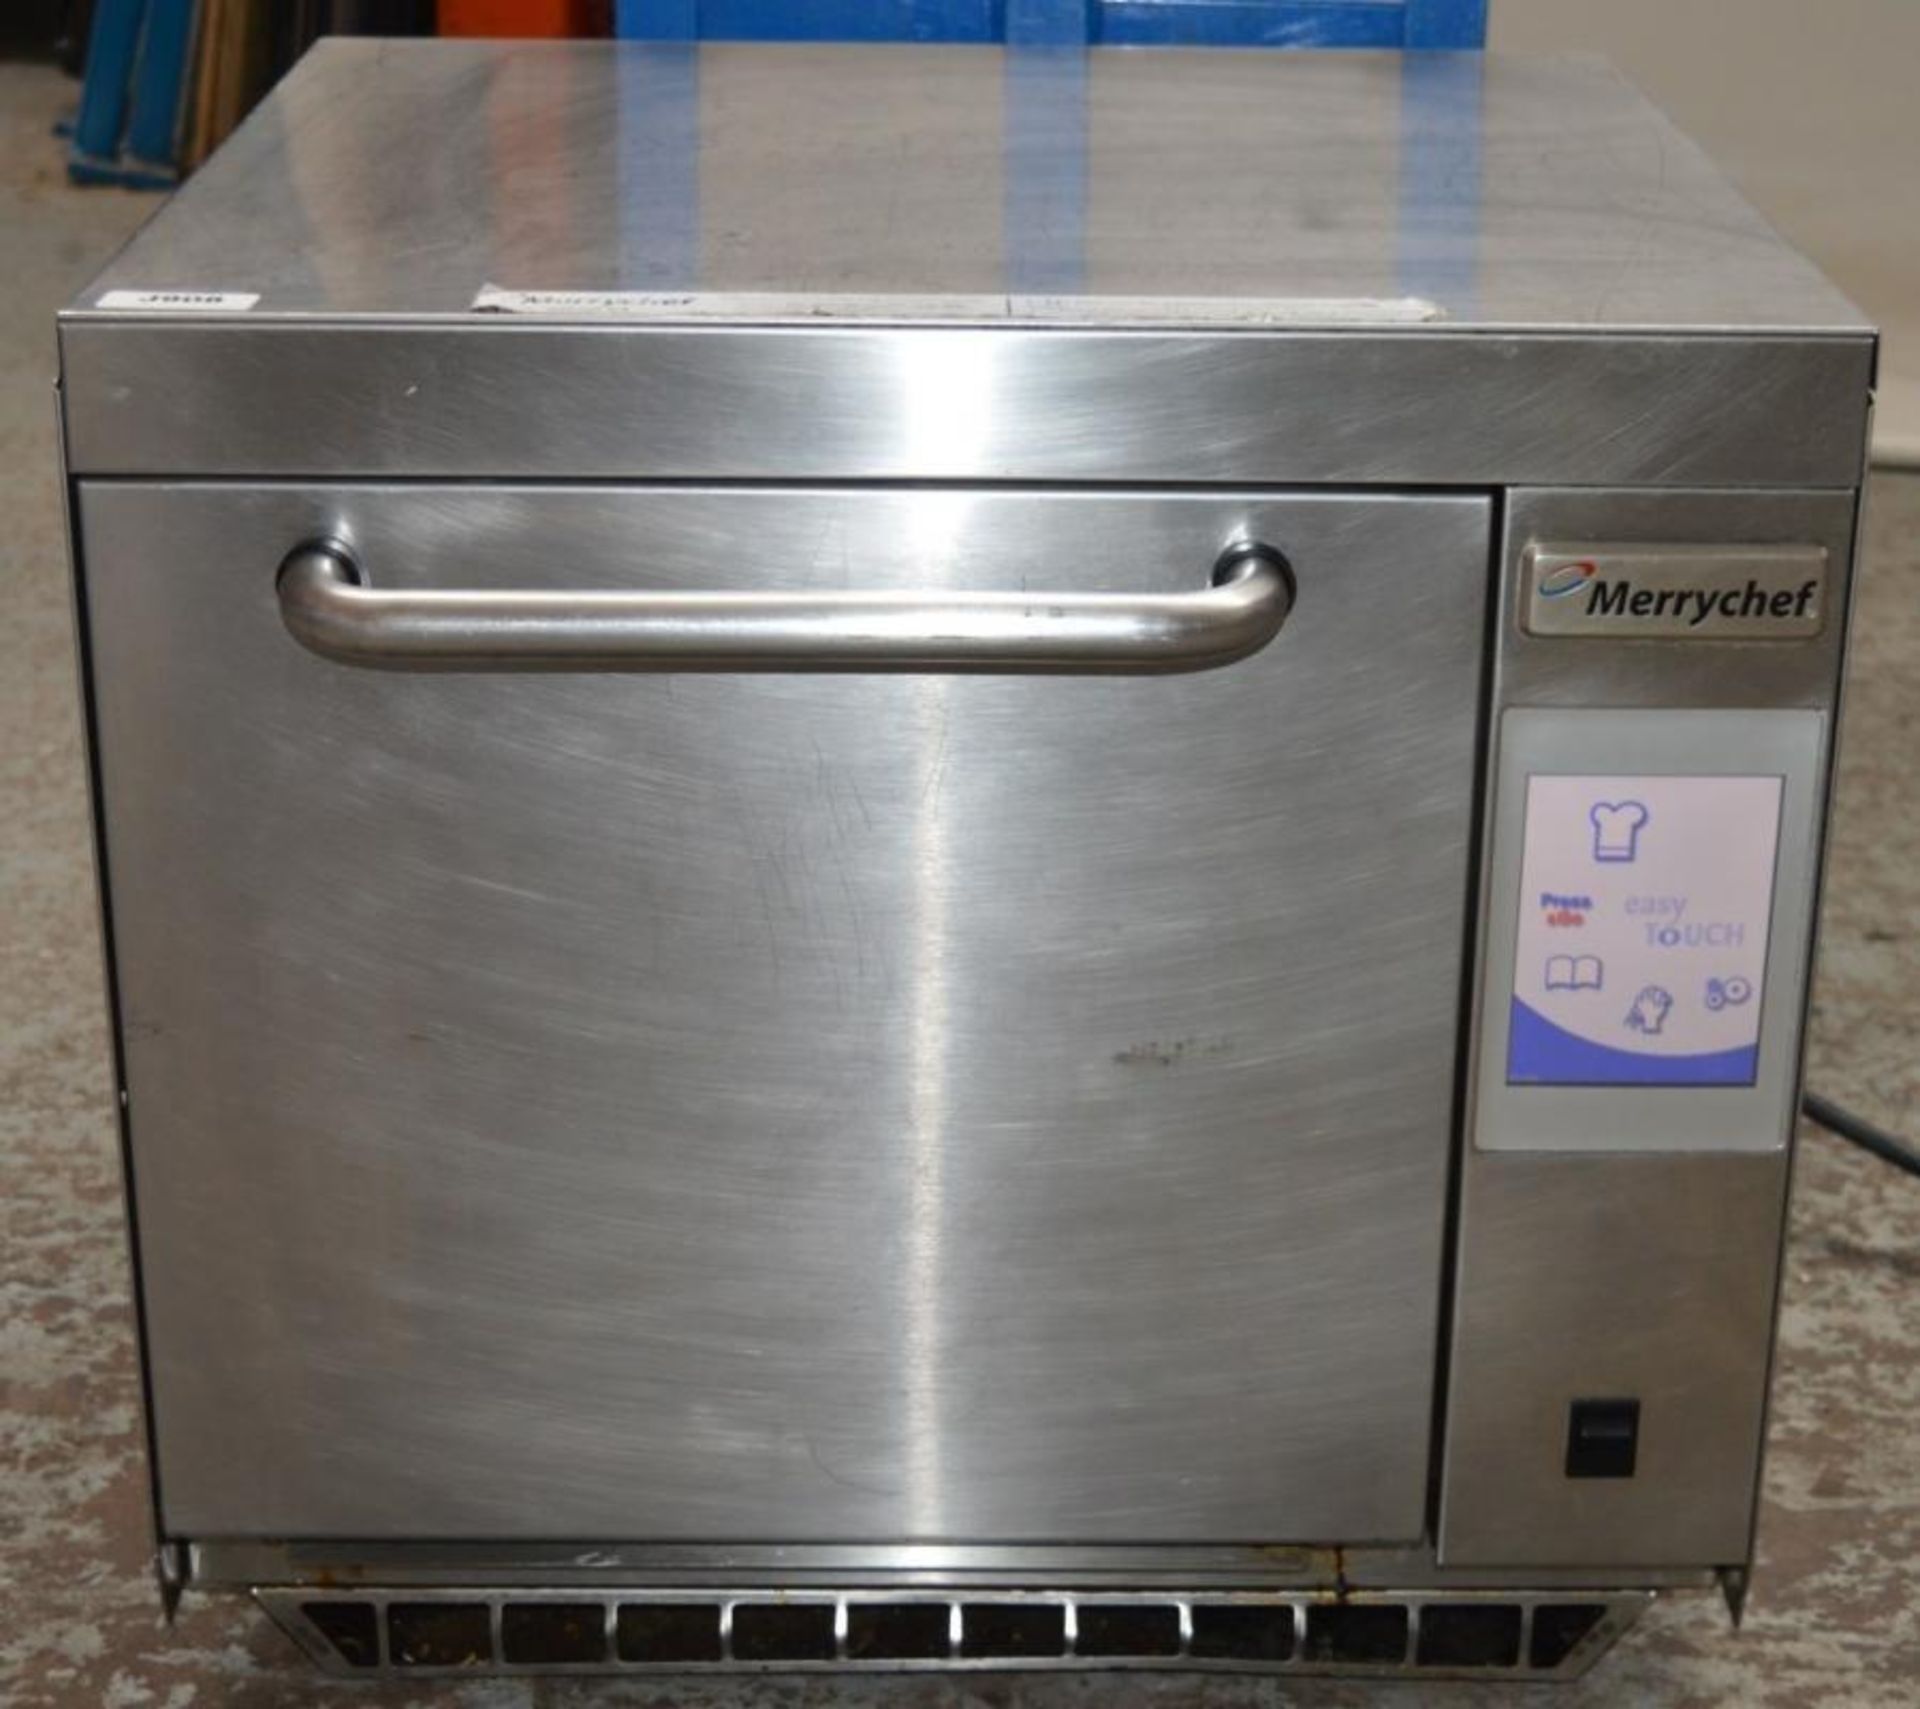 1 x Merrychef Eikon 3 Combination Microwave Oven Features 700w Microwave Output, 3.0kw Convection Ov